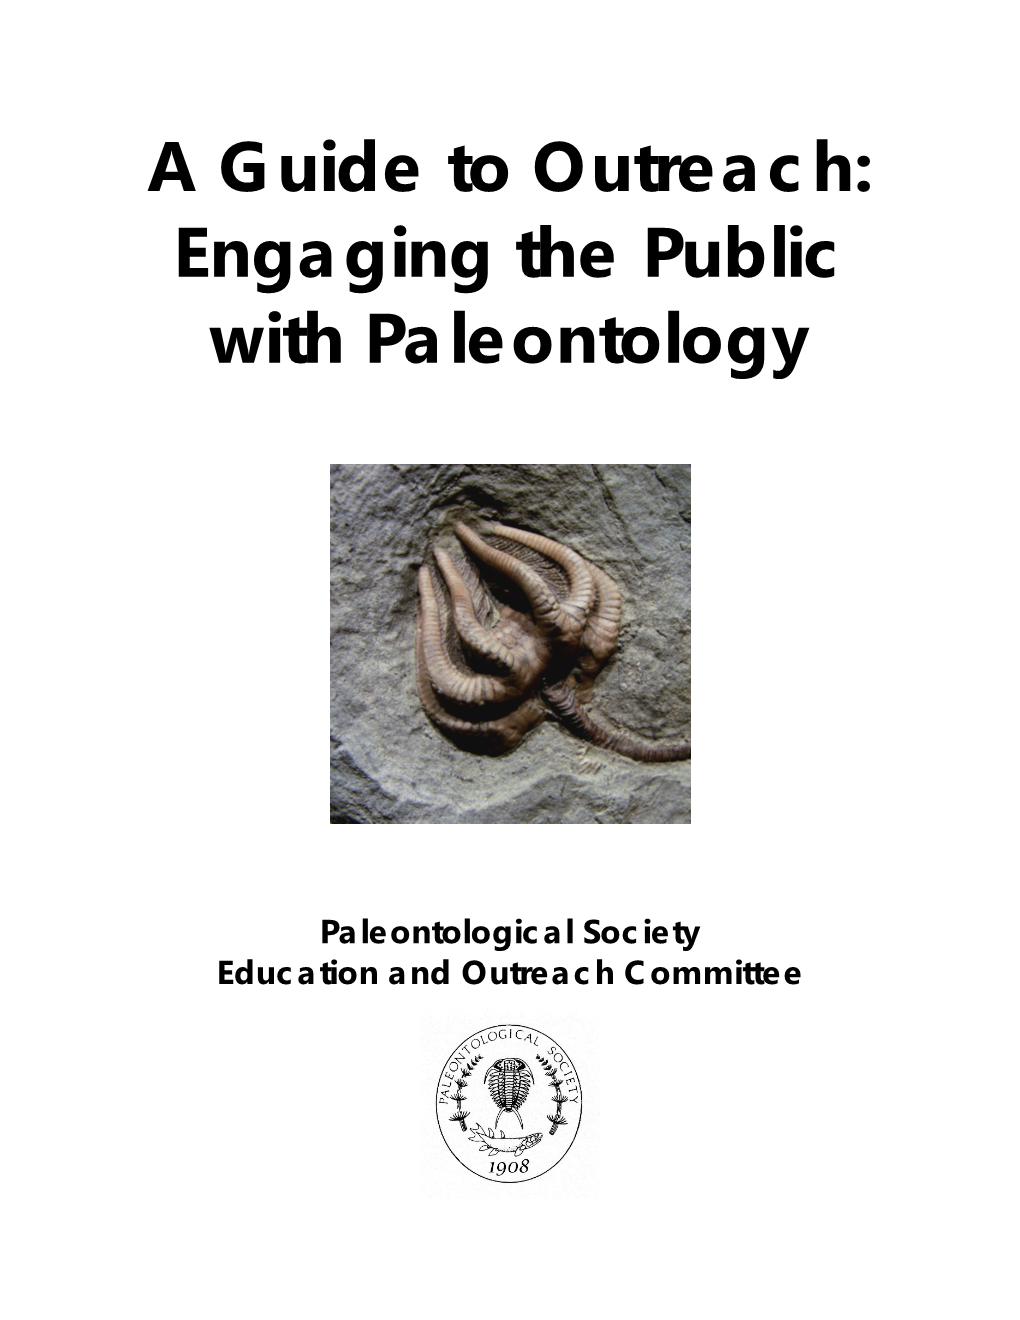 A Guide to Outreach: Engaging the Public with Paleontology